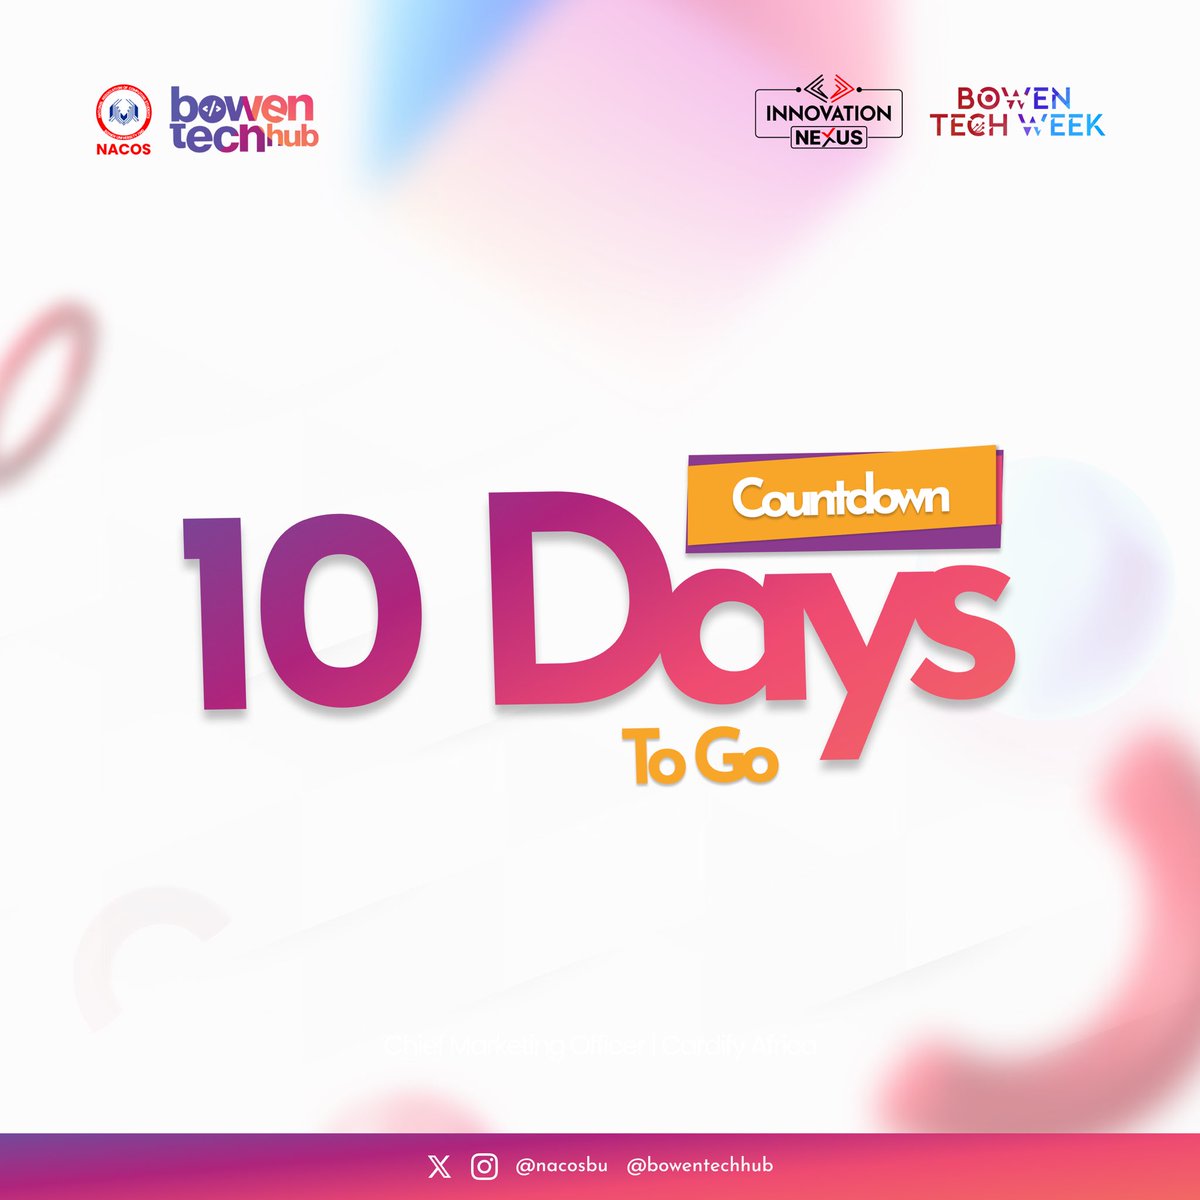 Only 10 days left until the big day !!⏰ 🎉Get ready to ignite excitement and anticipation as we countdown to an unforgettable BOWEN TECH WEEK!!!#10DaysToGo #bowenuniversity #bowen #techweek #tech #bowentechweek24